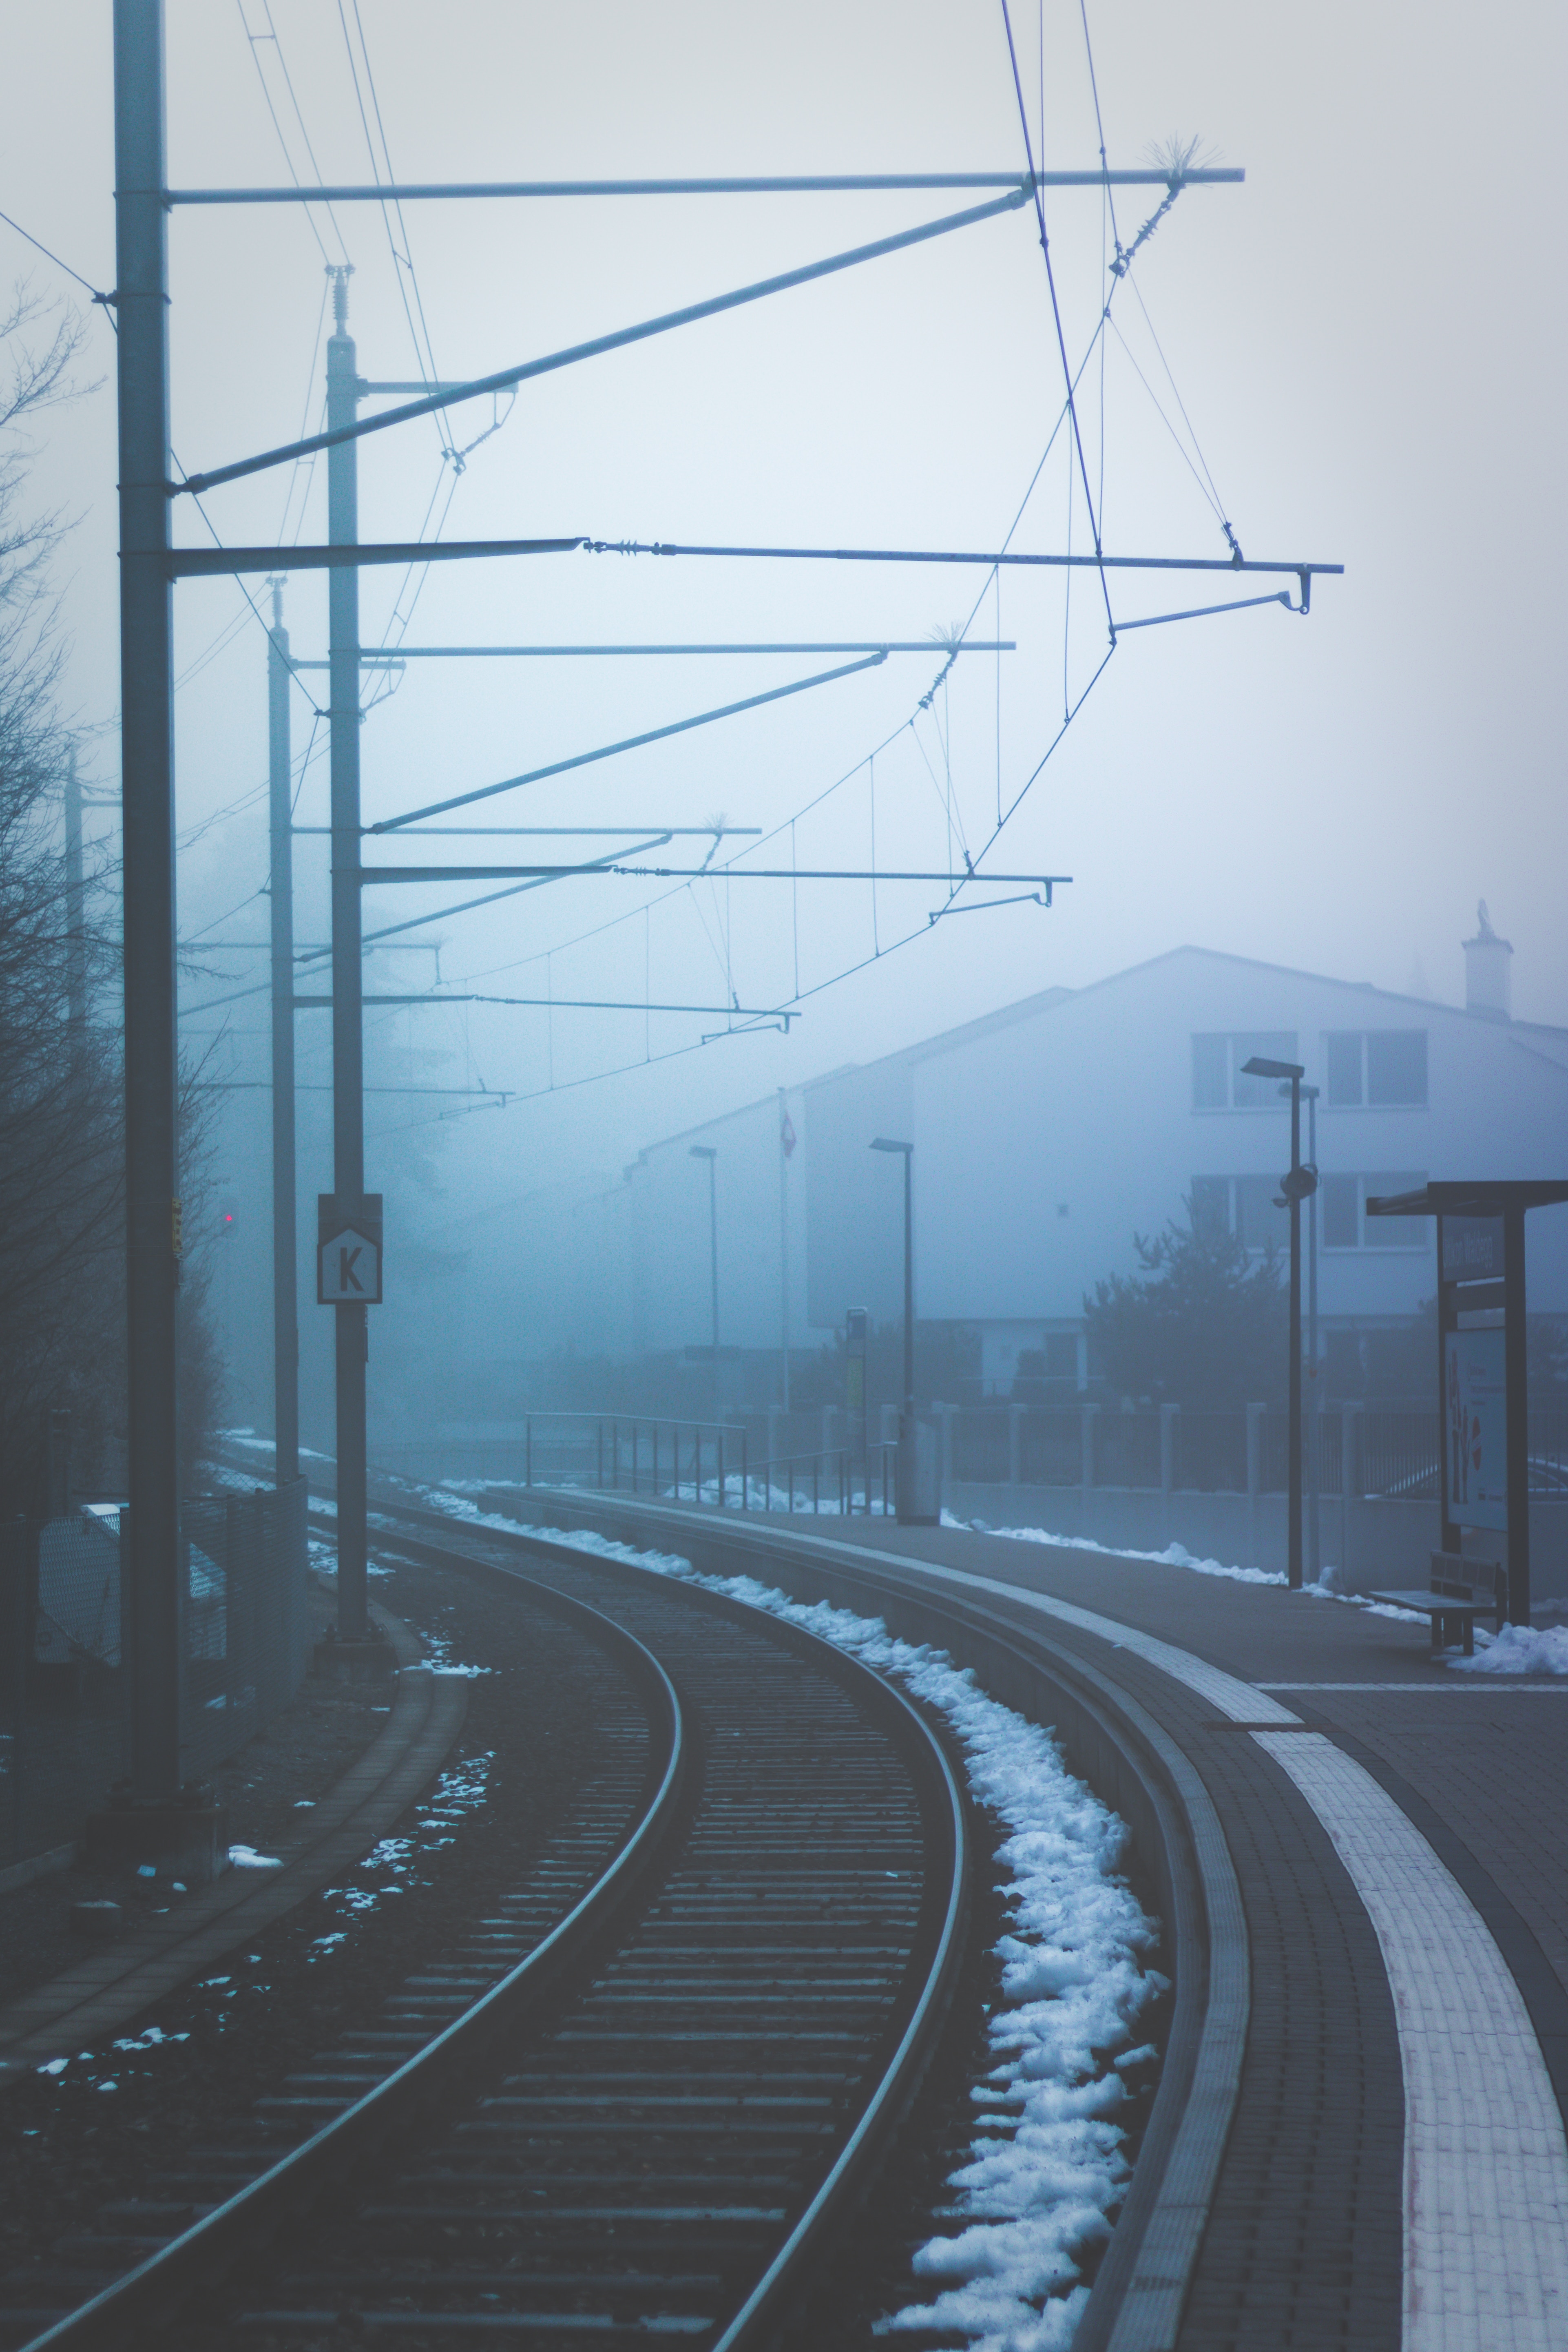 android turn, cities, fog, railway, station